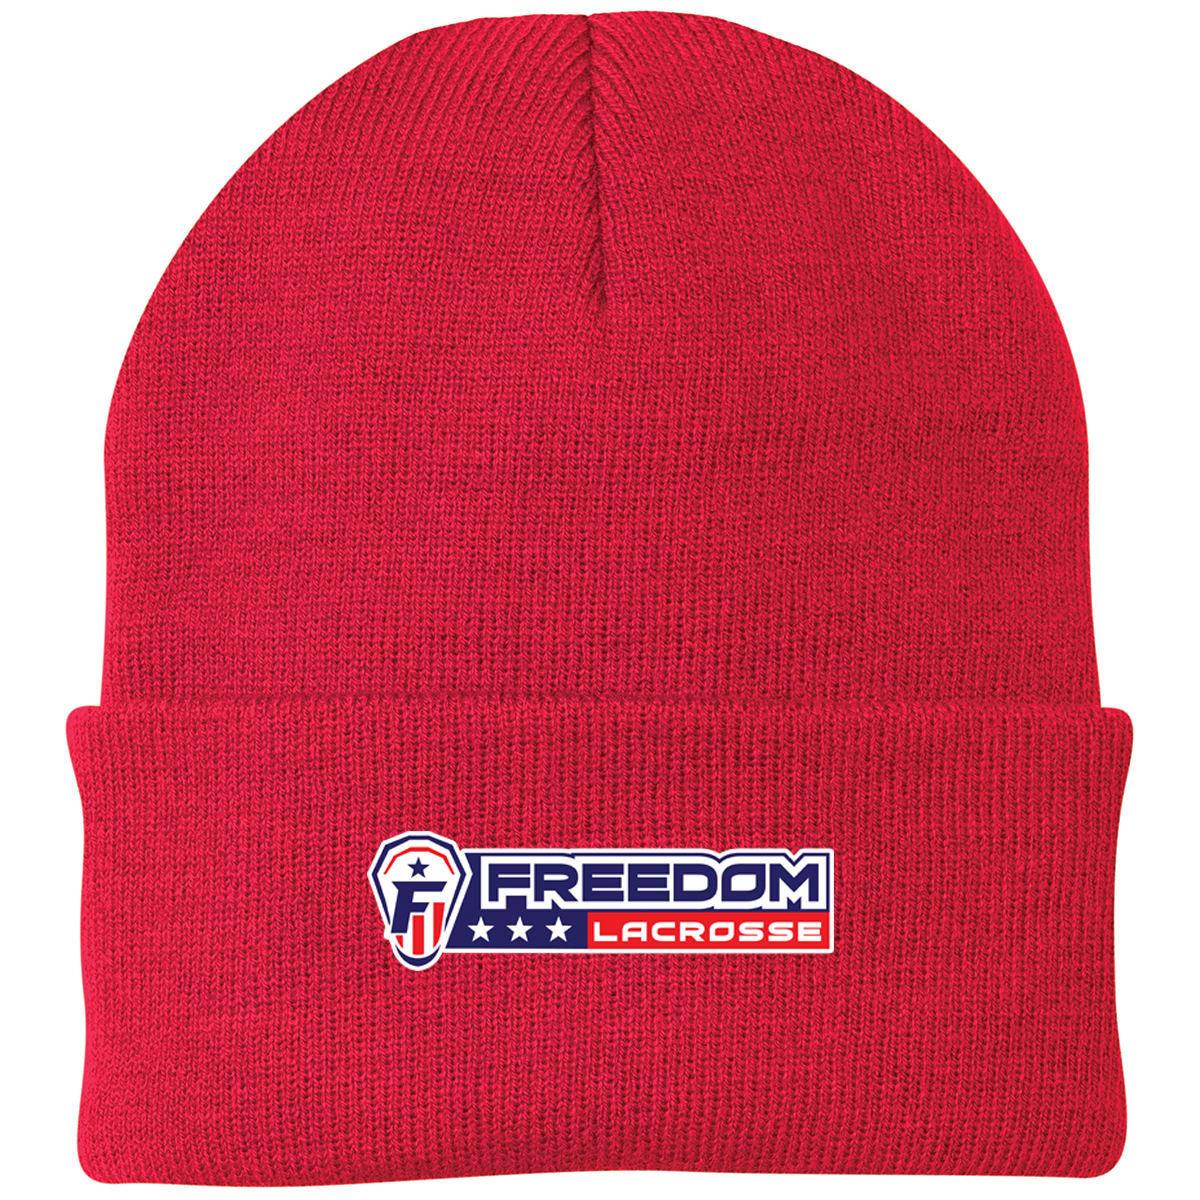 Freedom Lacrosse Red Knit Beanie